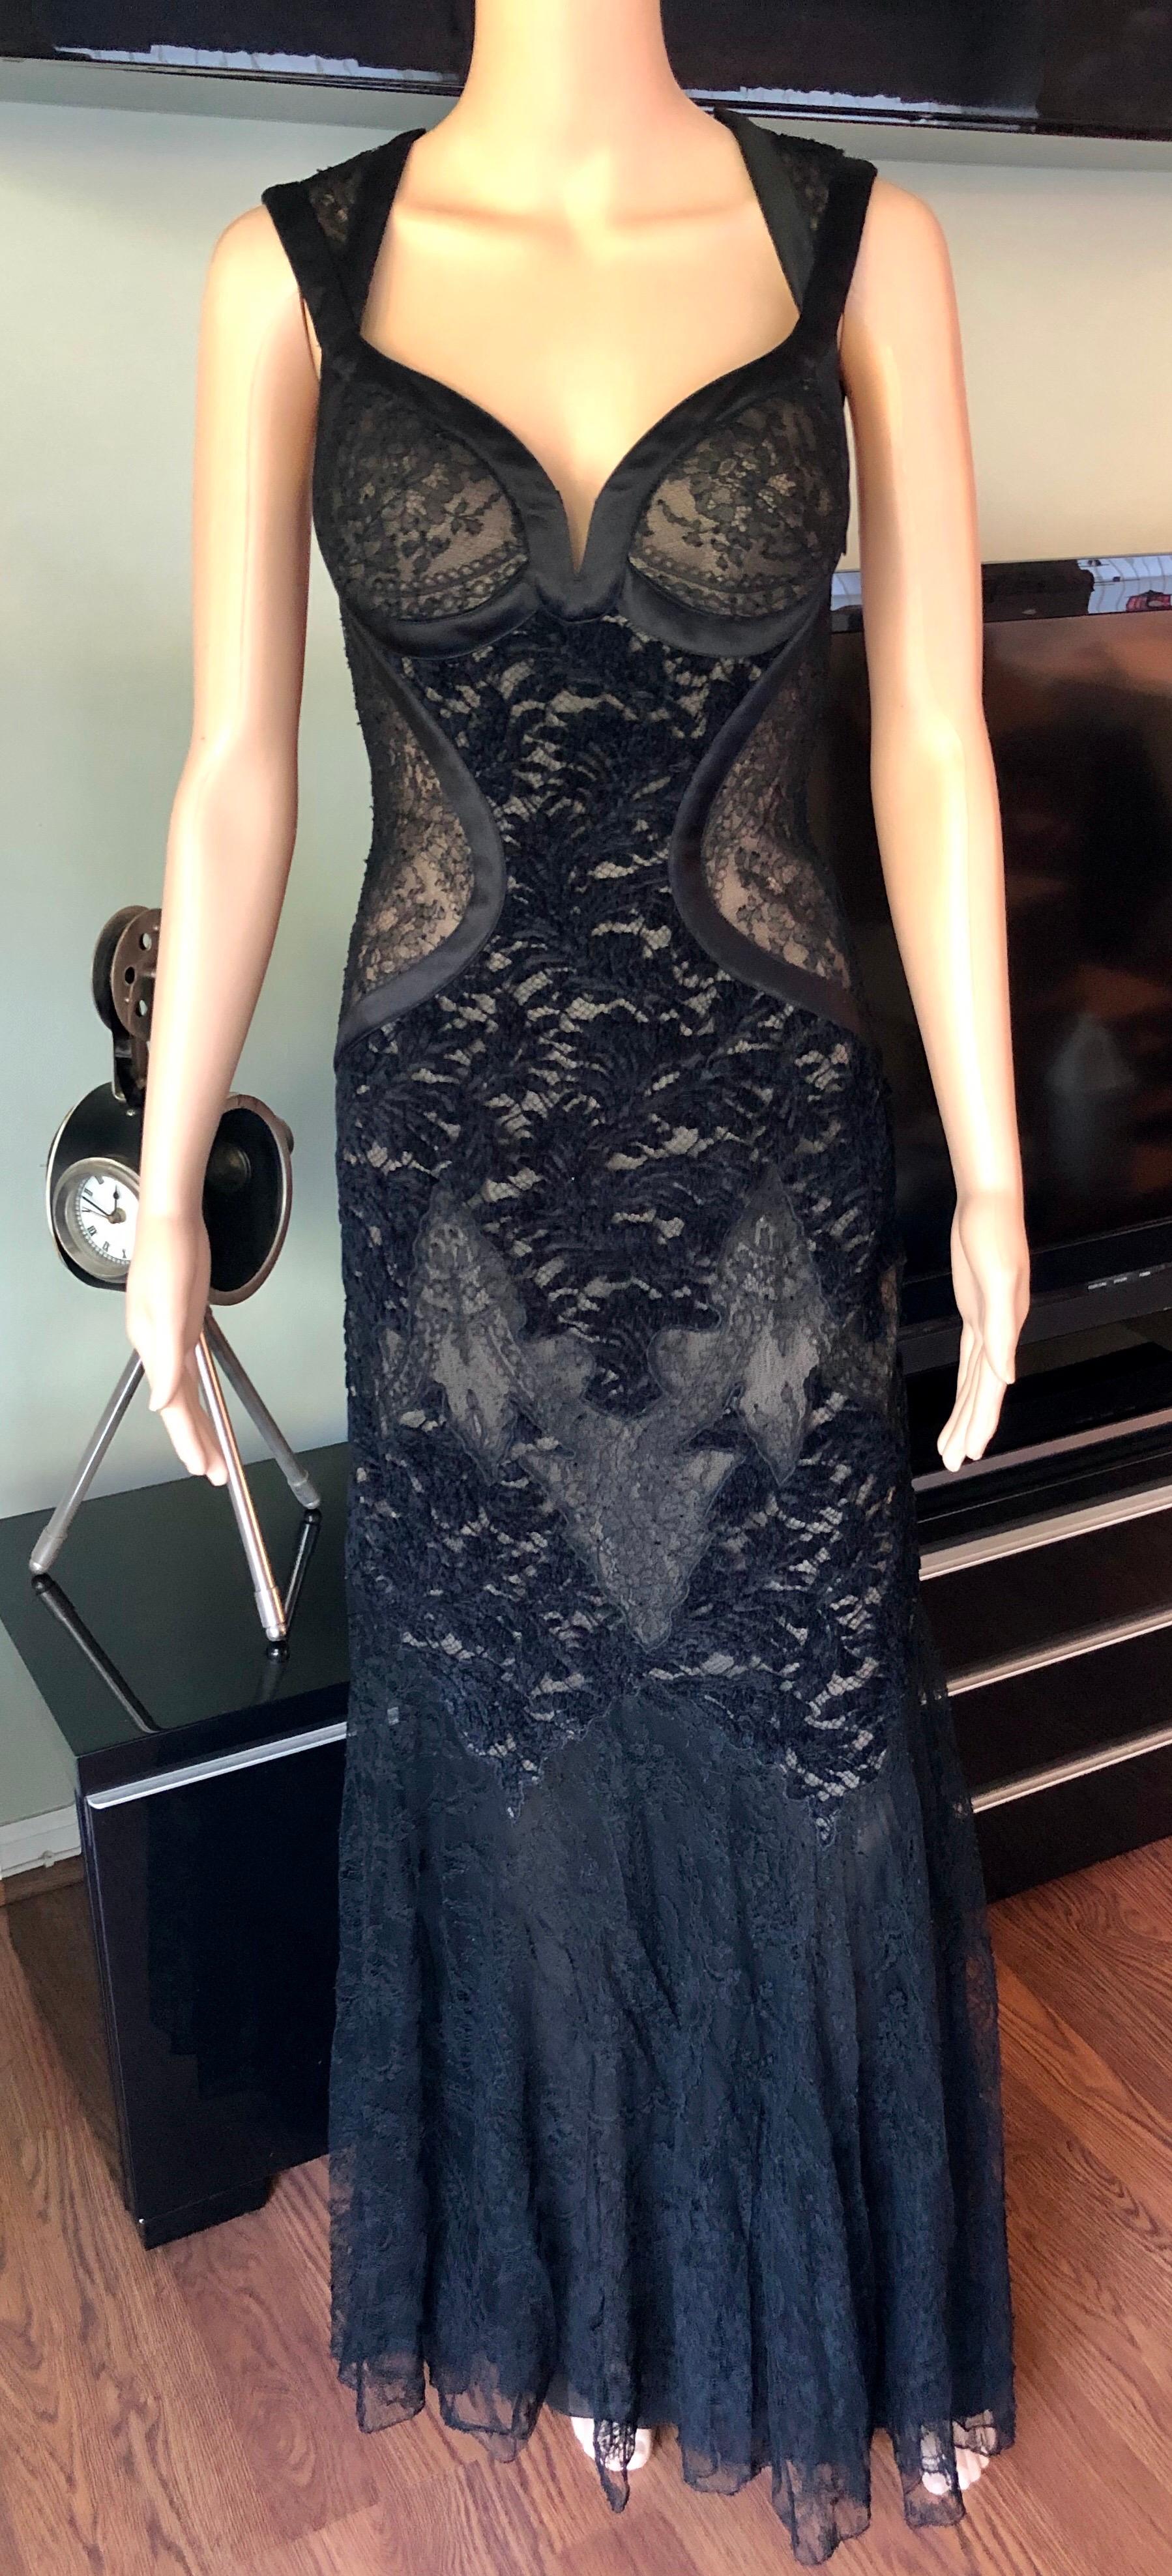 Versace F/W 2005 Runway Bustier Sheer Lace Open Back Black Evening Dress Gown 

Please note size tag has been removed but this dress will likely fit IT 40

